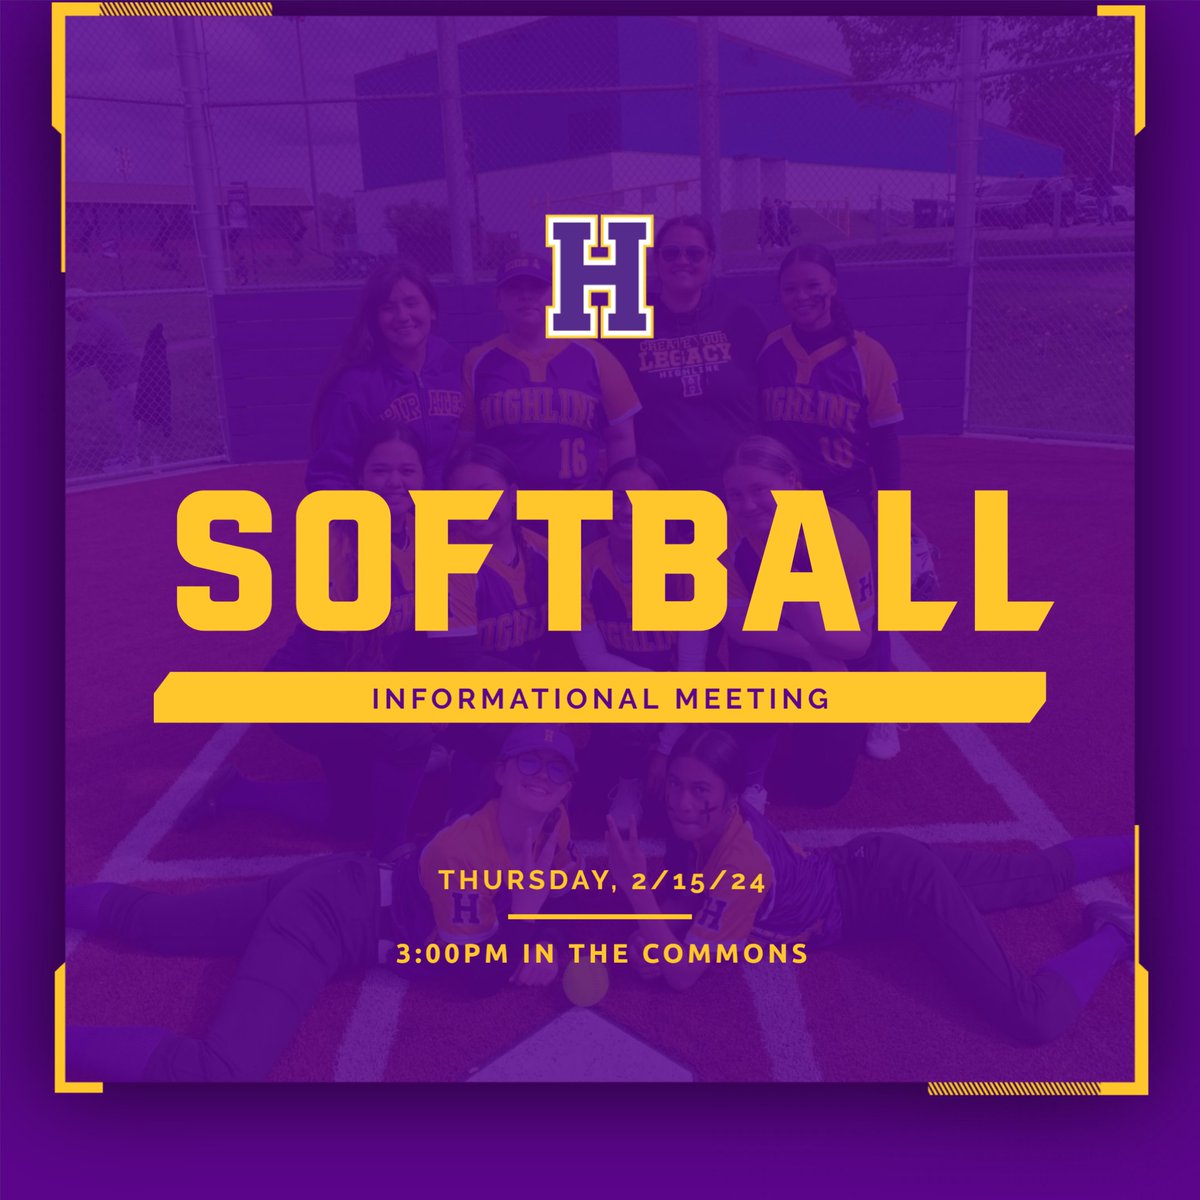 Are you interested in playing softball this spring? If so, come meet Coach Sarah and learn more about the program! #buildtheship